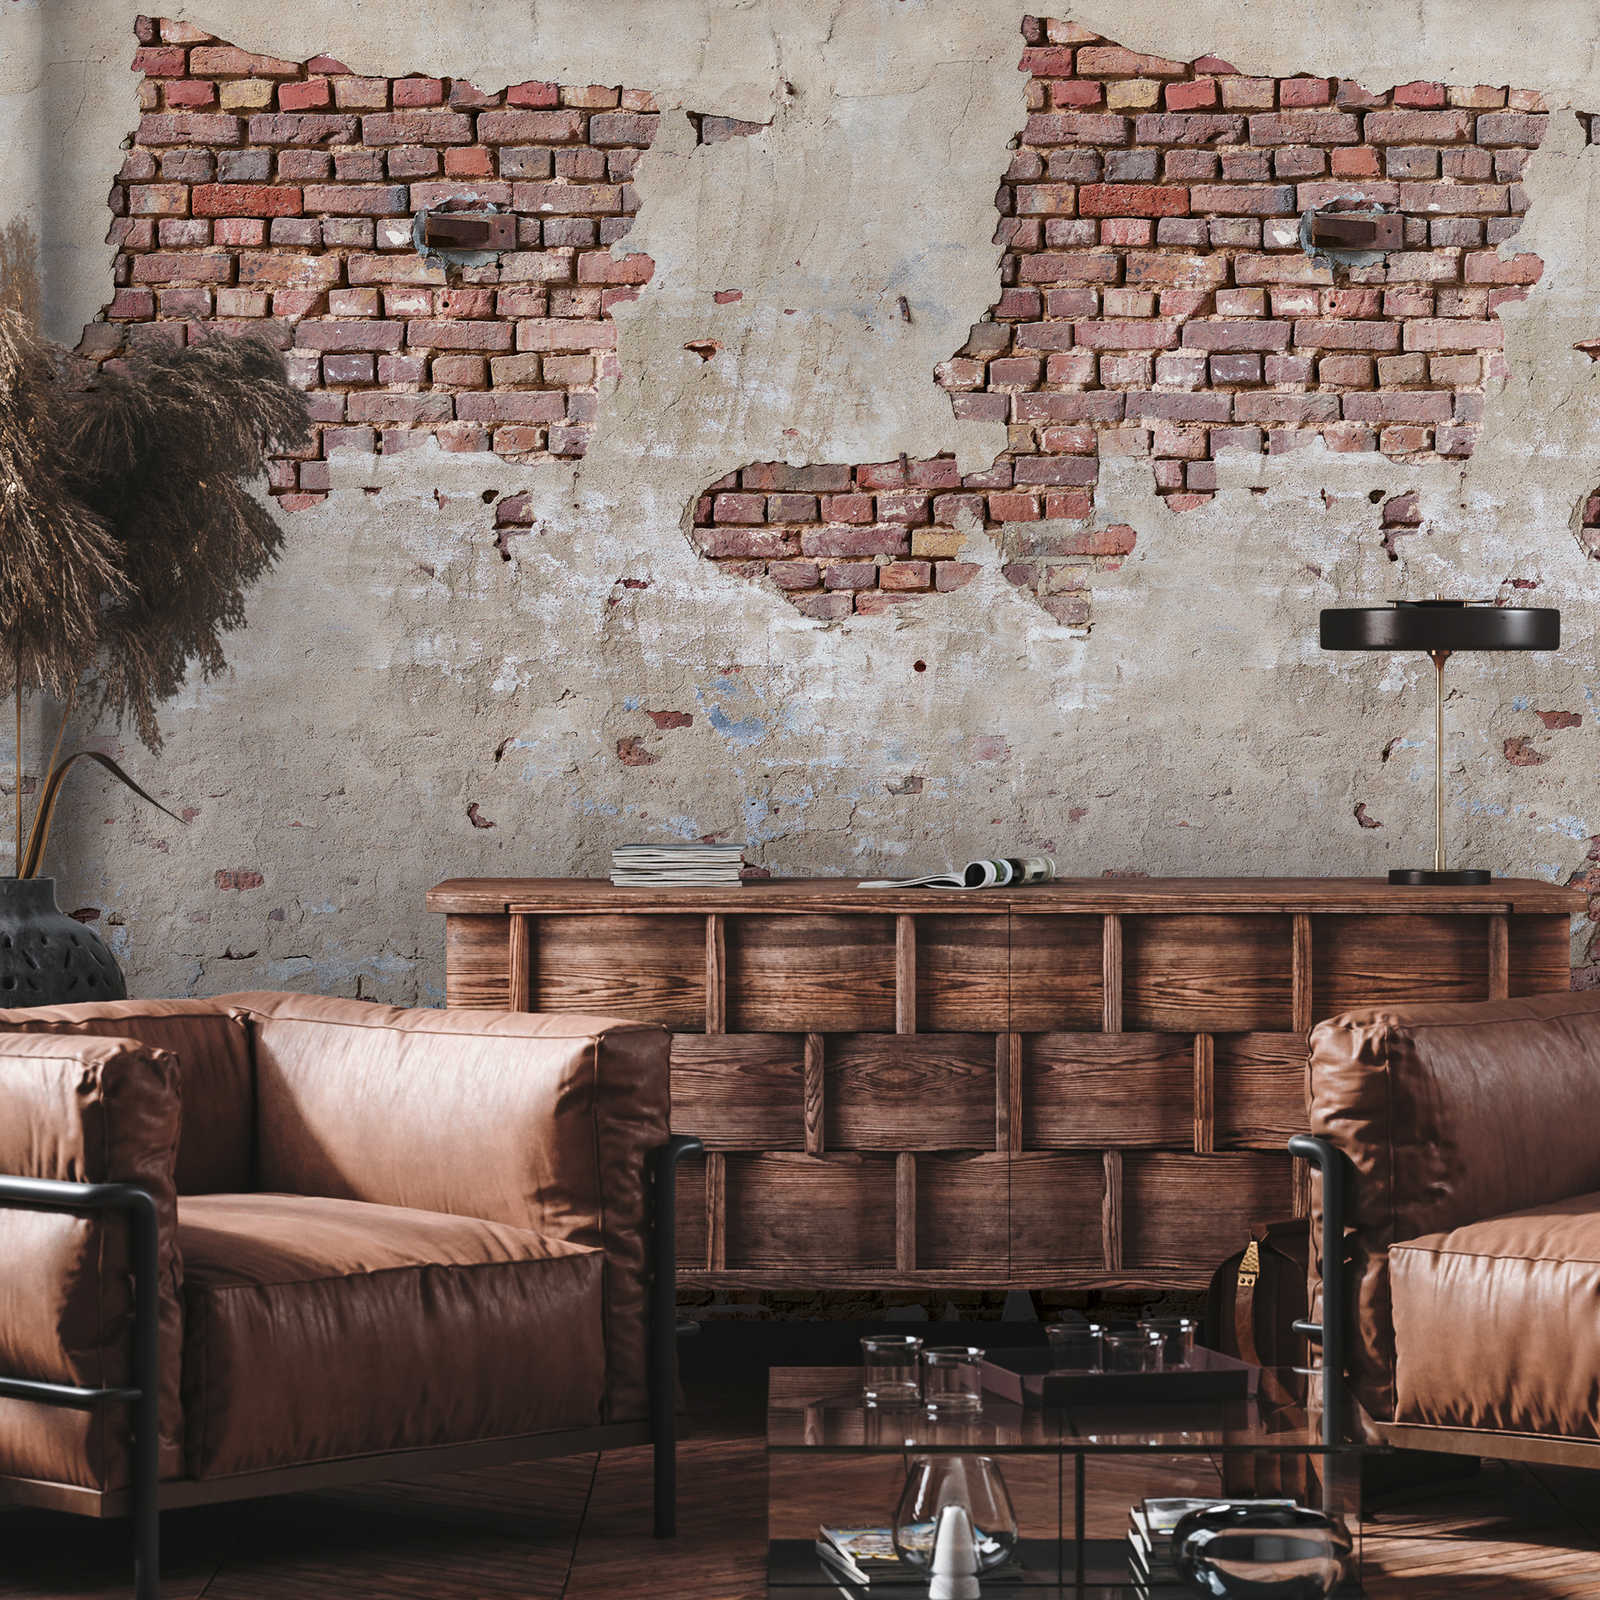 Brick wall wallpaper with plaster in abstract look - beige, red, brown
